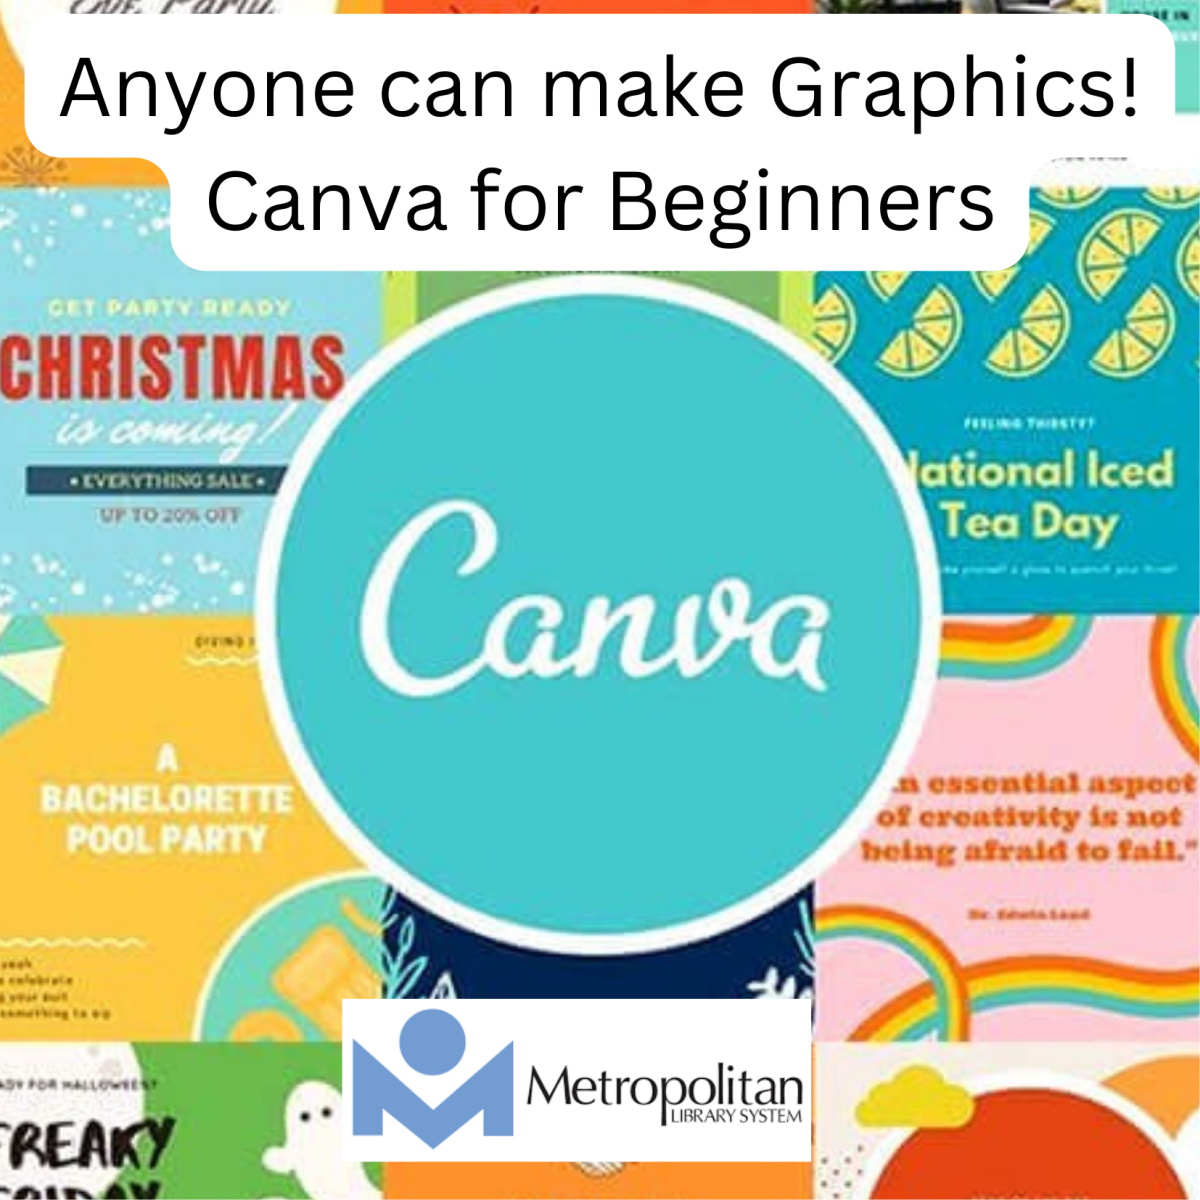 Anyone can make graphics! Canva for beginners